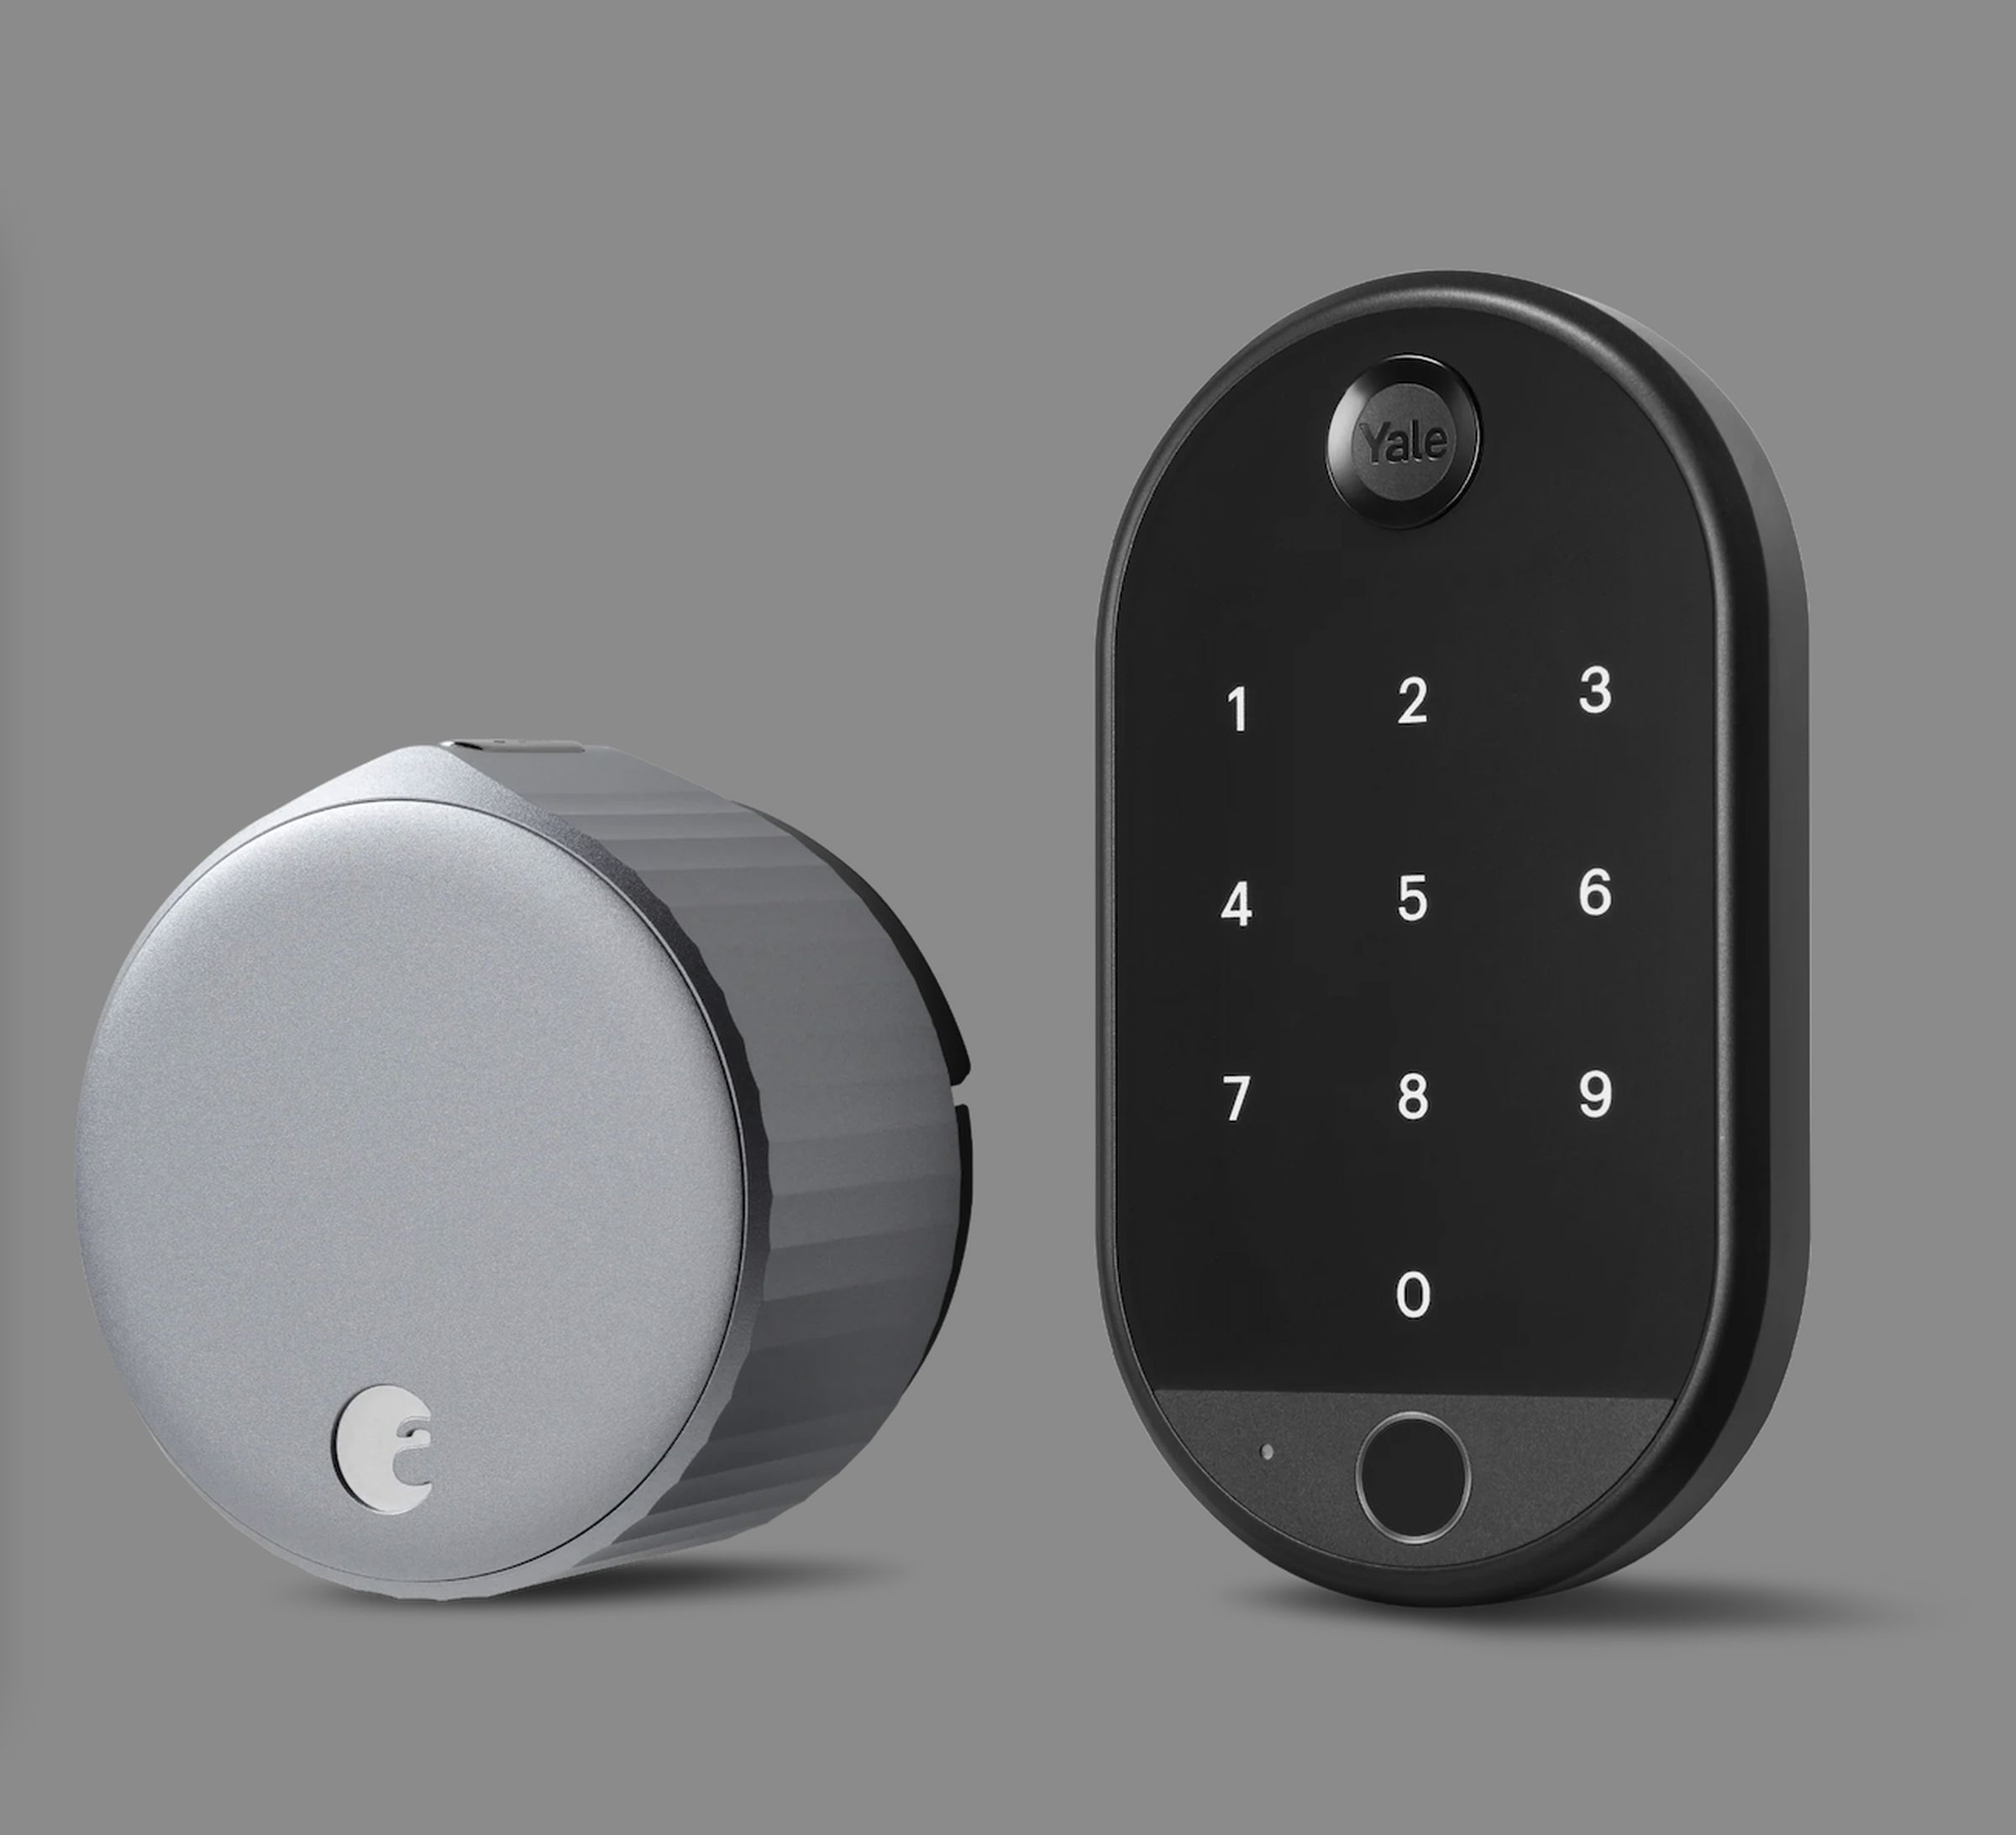 The newest August smart locks work with the new Yale keypad with a built-in fingerprint reader.